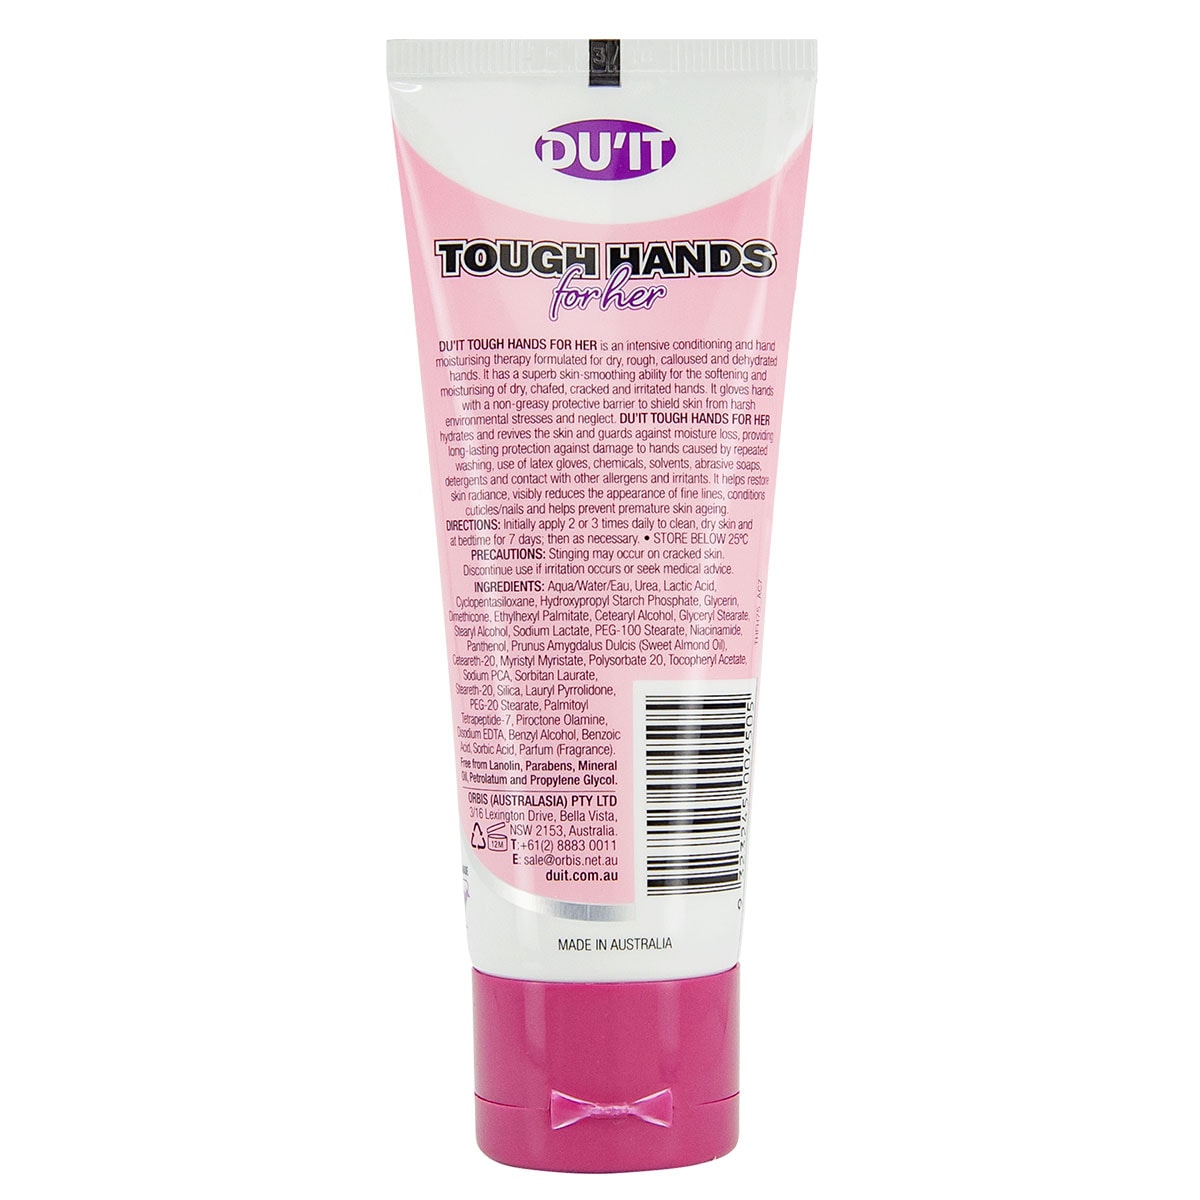 Duit Tough Hands for Her Anti-Ageing 75g